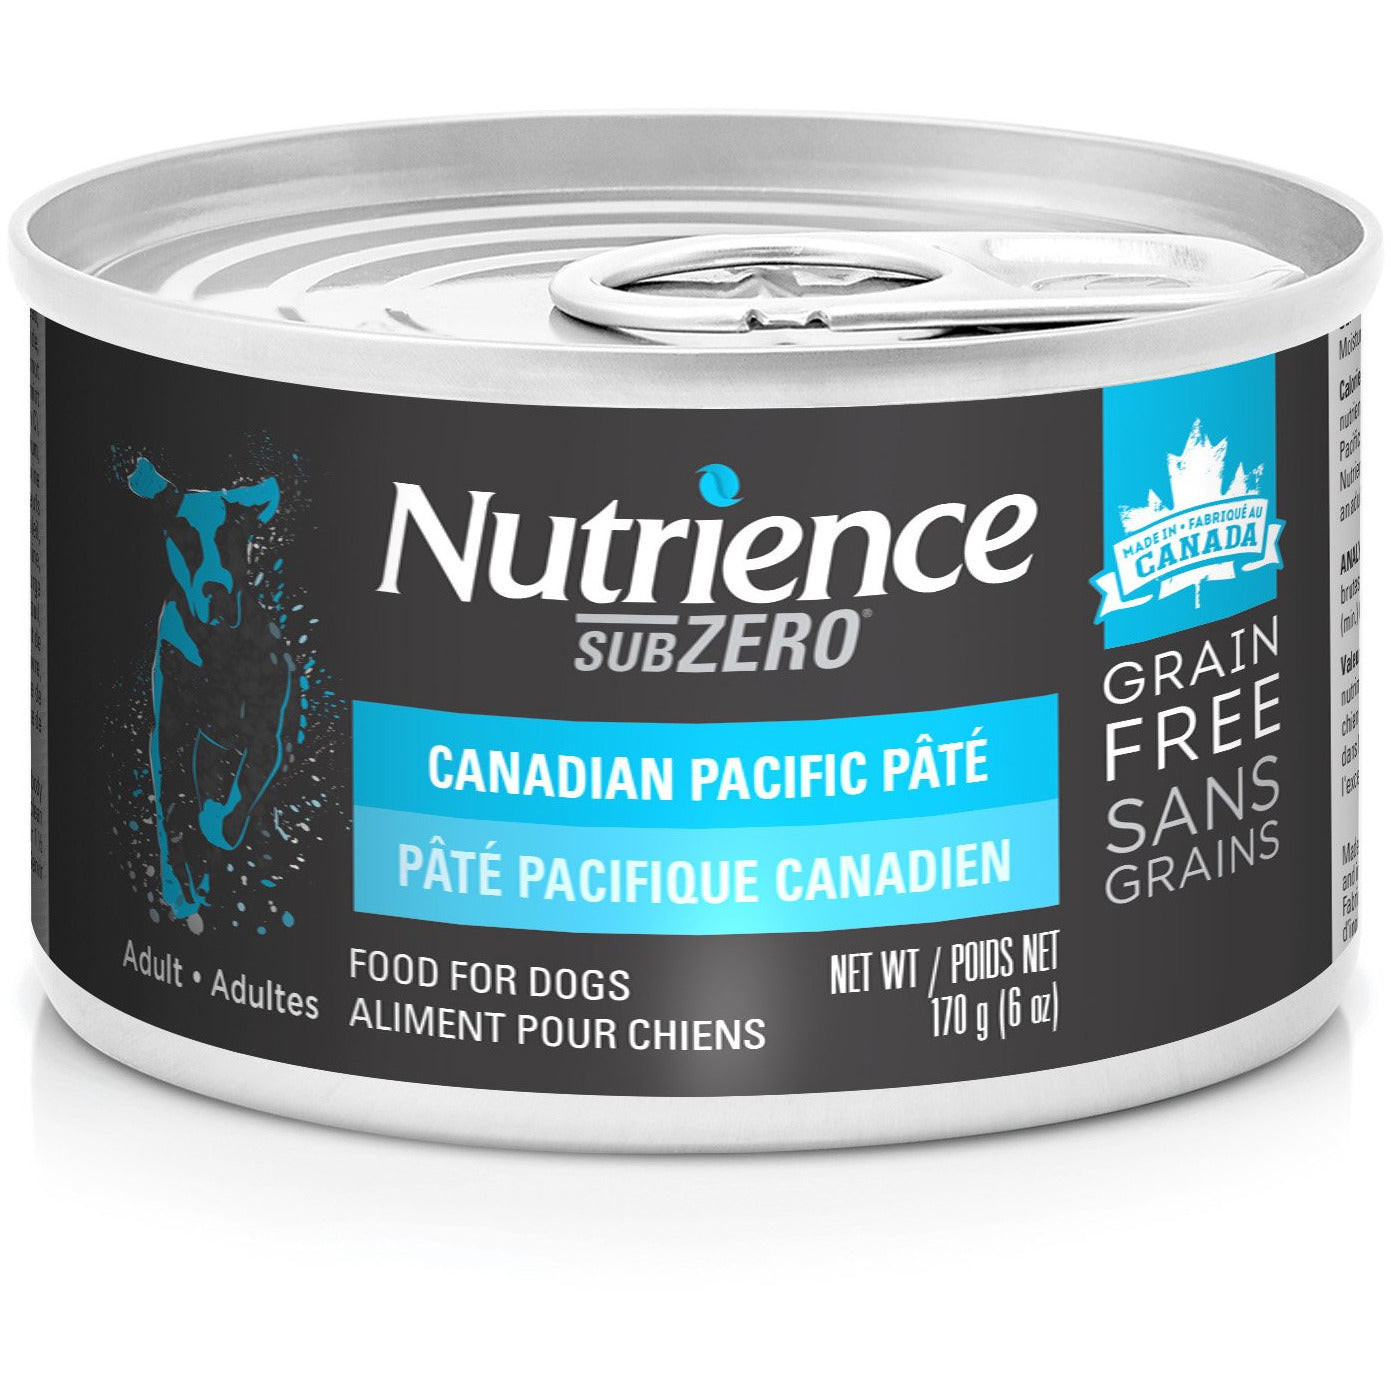 Nutrience Canned Dog Food Grain Free SubZero Canadian Pacific 170g Canned Dog Food 170g | PetMax Canada